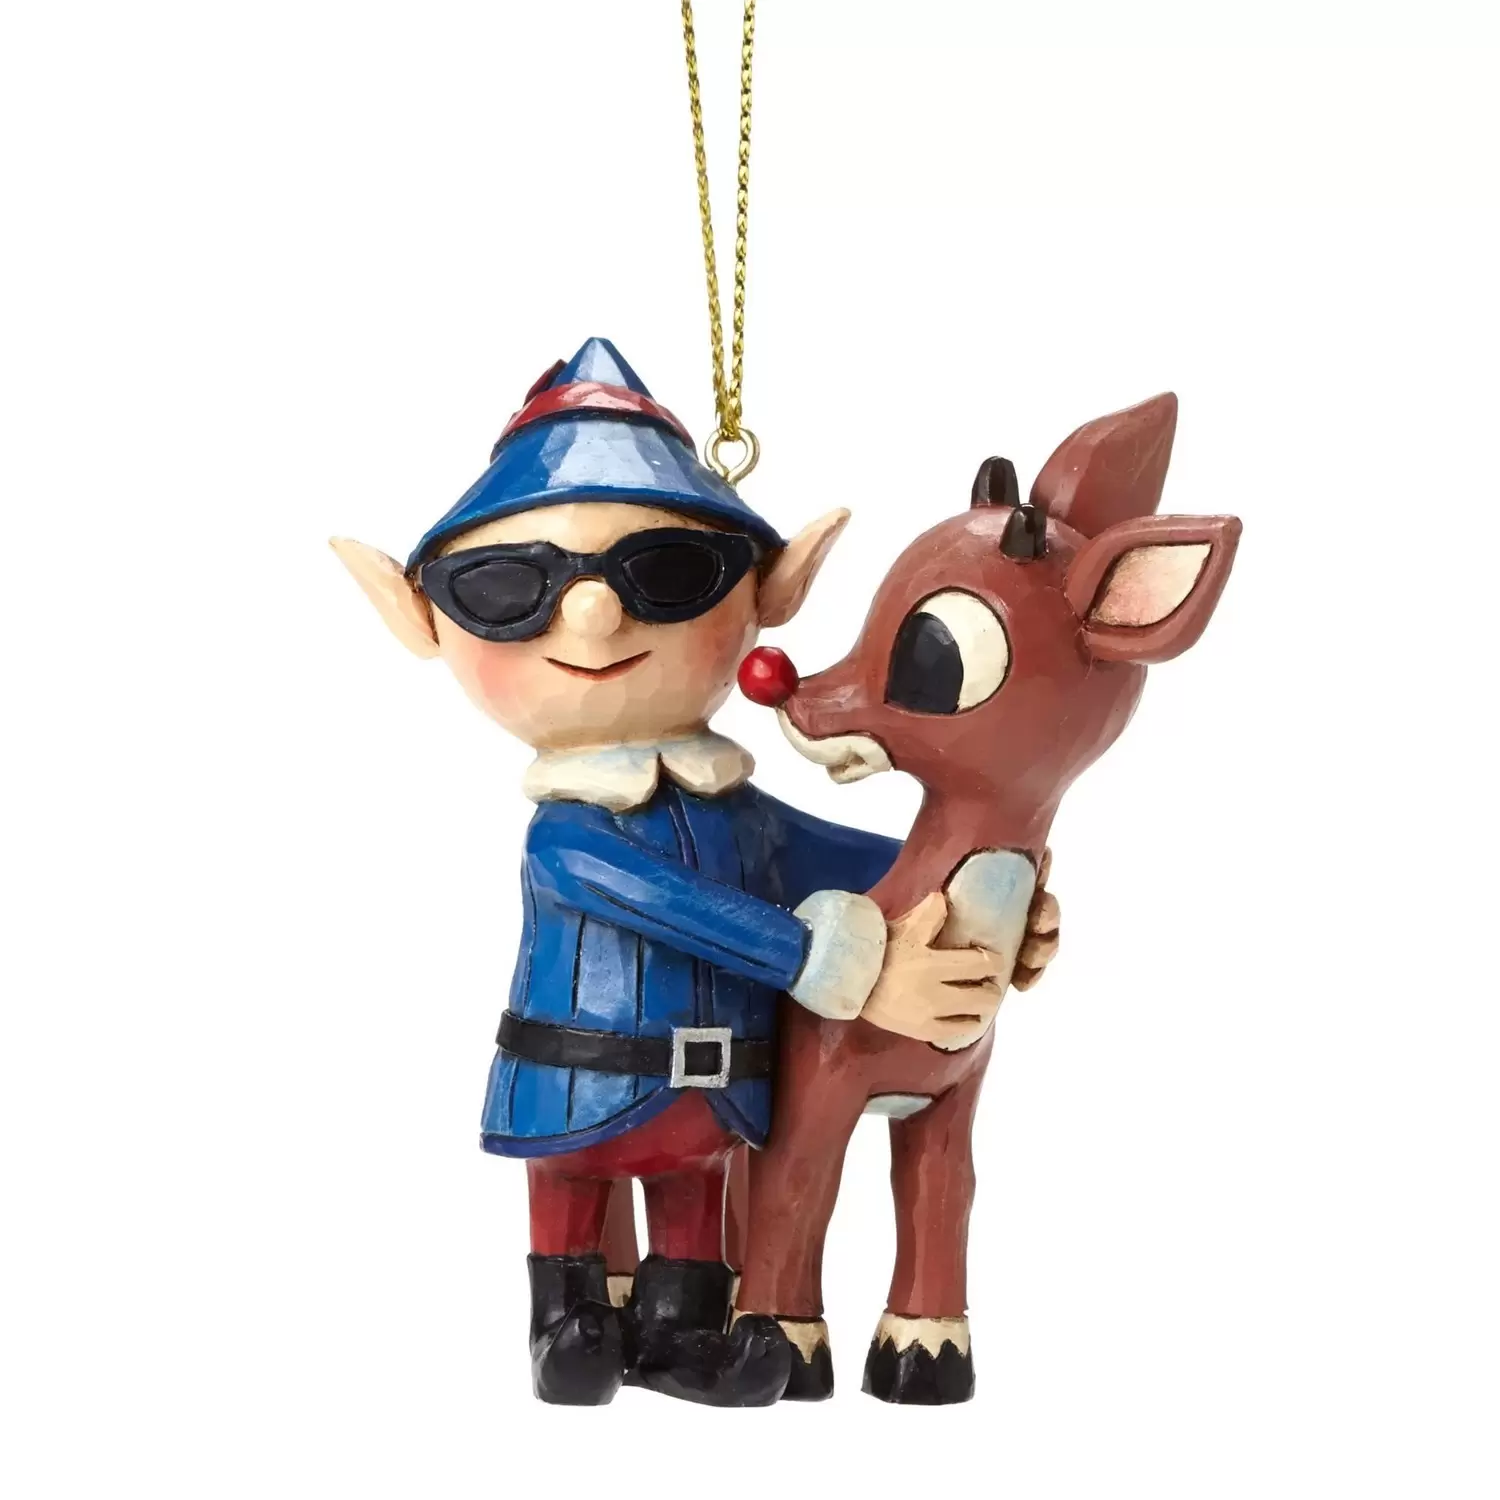 Cartoons Characters by Jim Shore - Rudolph with Elf in Sunglasses Hanging Ornament